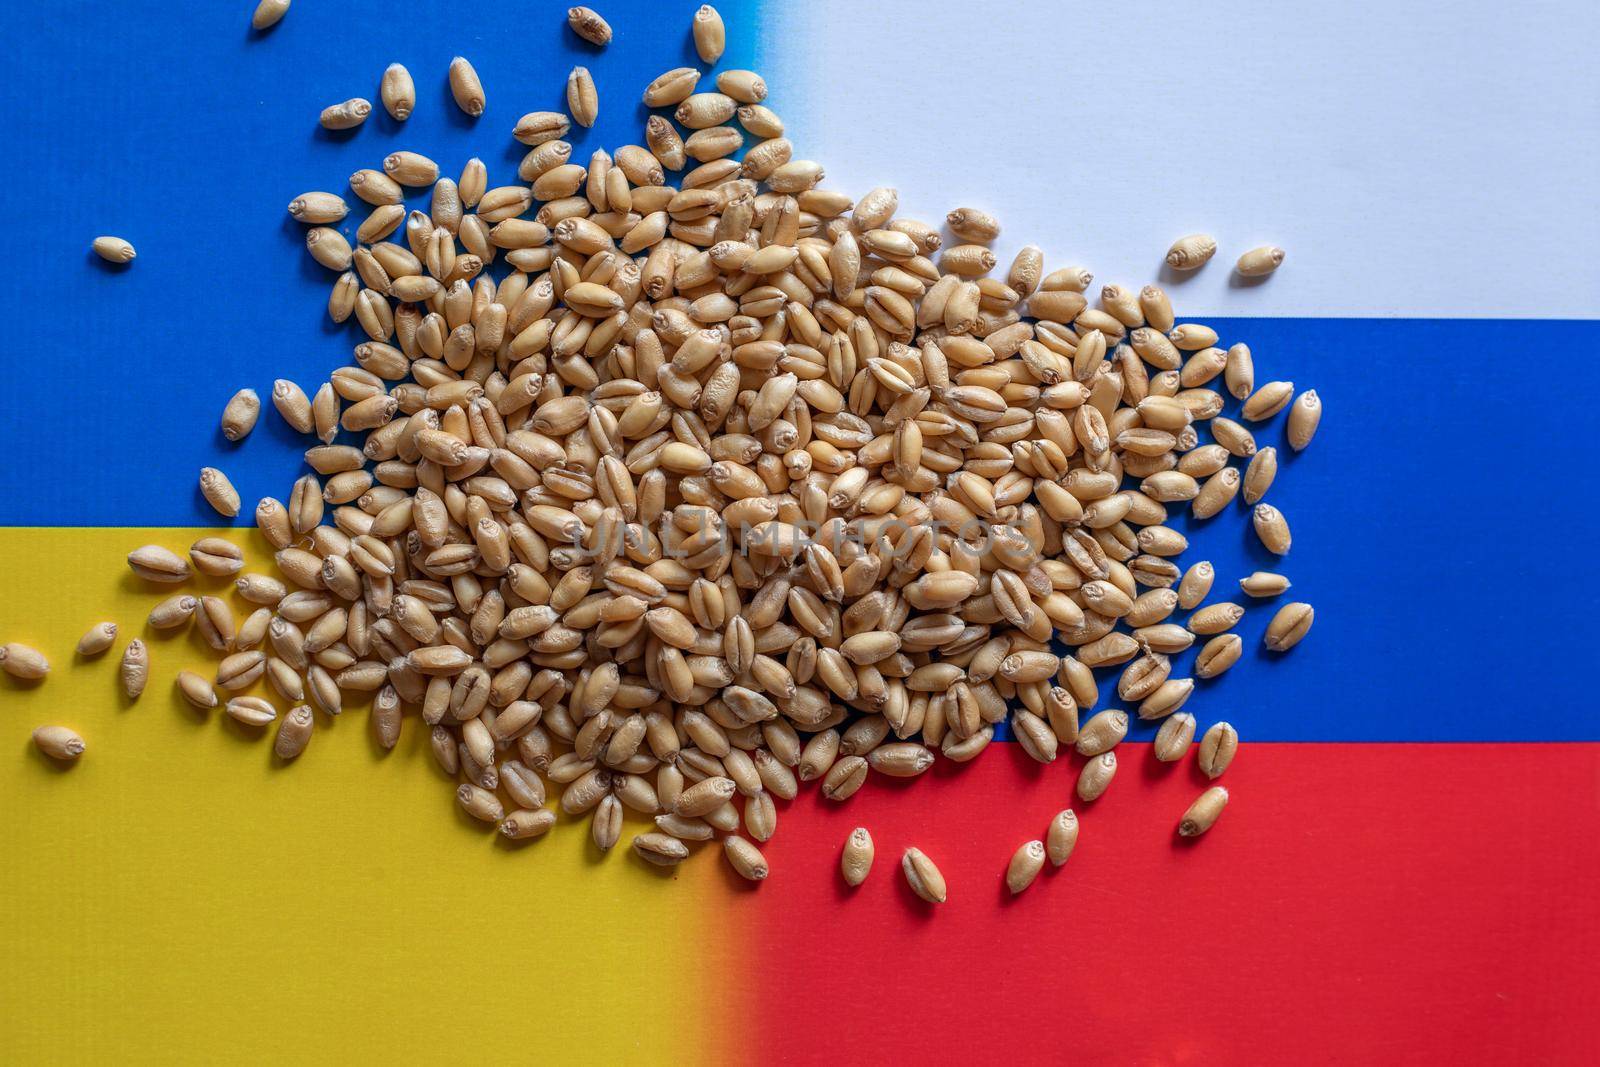 Russia Ukraine war and wheat export crisis concept. World grain crisis concept stock photo by adamr